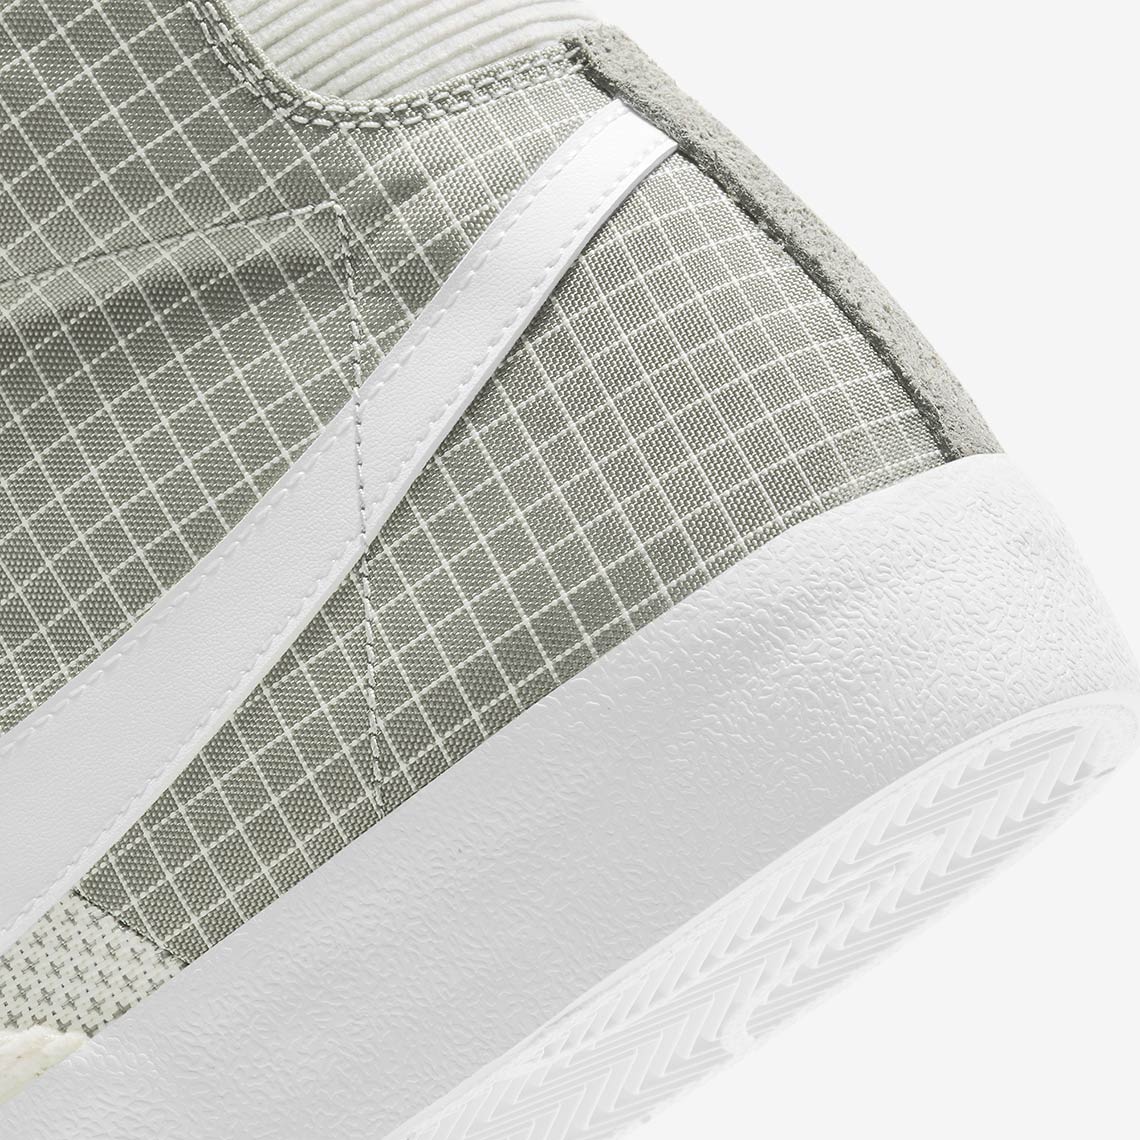 Nike Upholsters The Blazer Mid ’77 In A Mix Of Materials | LaptrinhX / News